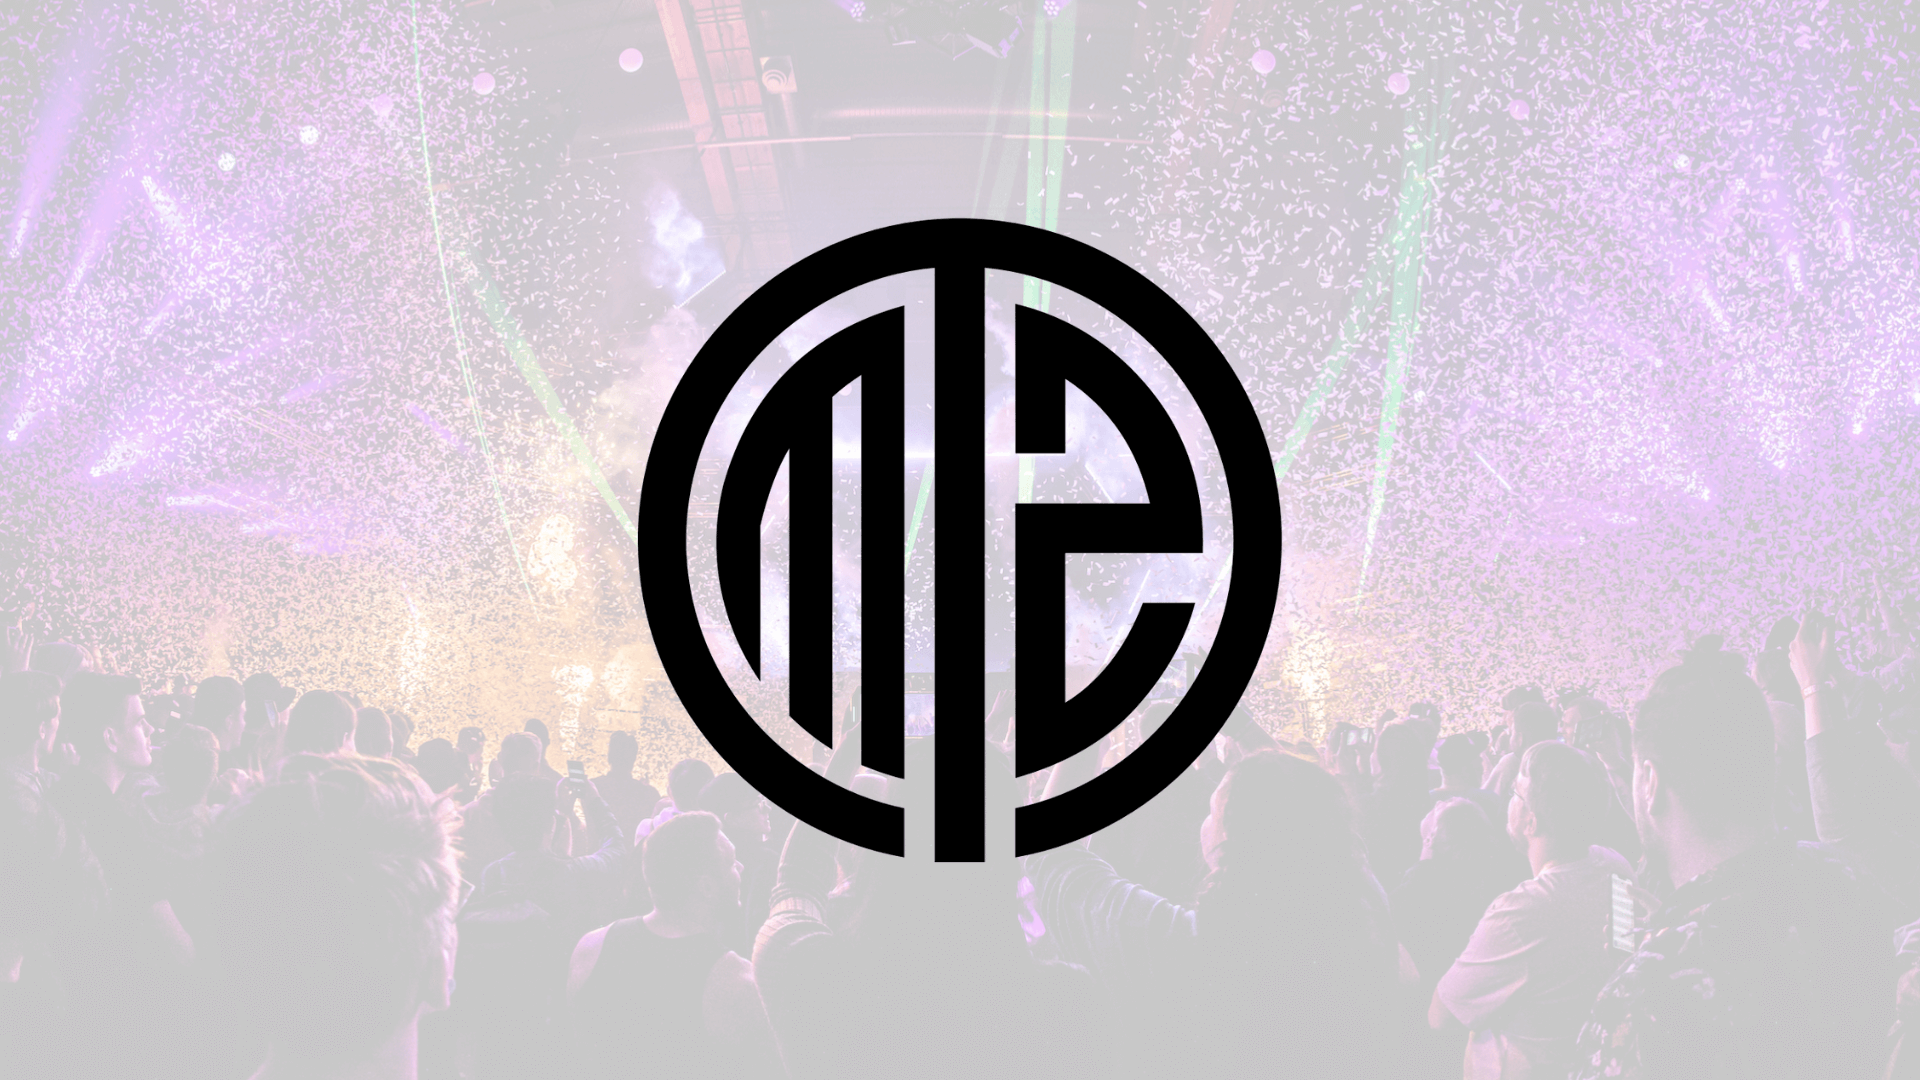 North American esports organization TSM announced it will leave the League of Legends Championship Series (LCS), NA's top League of Legends competition. Instead of relocating to League of Legends, the organisation announced plans for a new region. According to an announcement made on the 20th of May, CEO Andy continued to head of TSM.